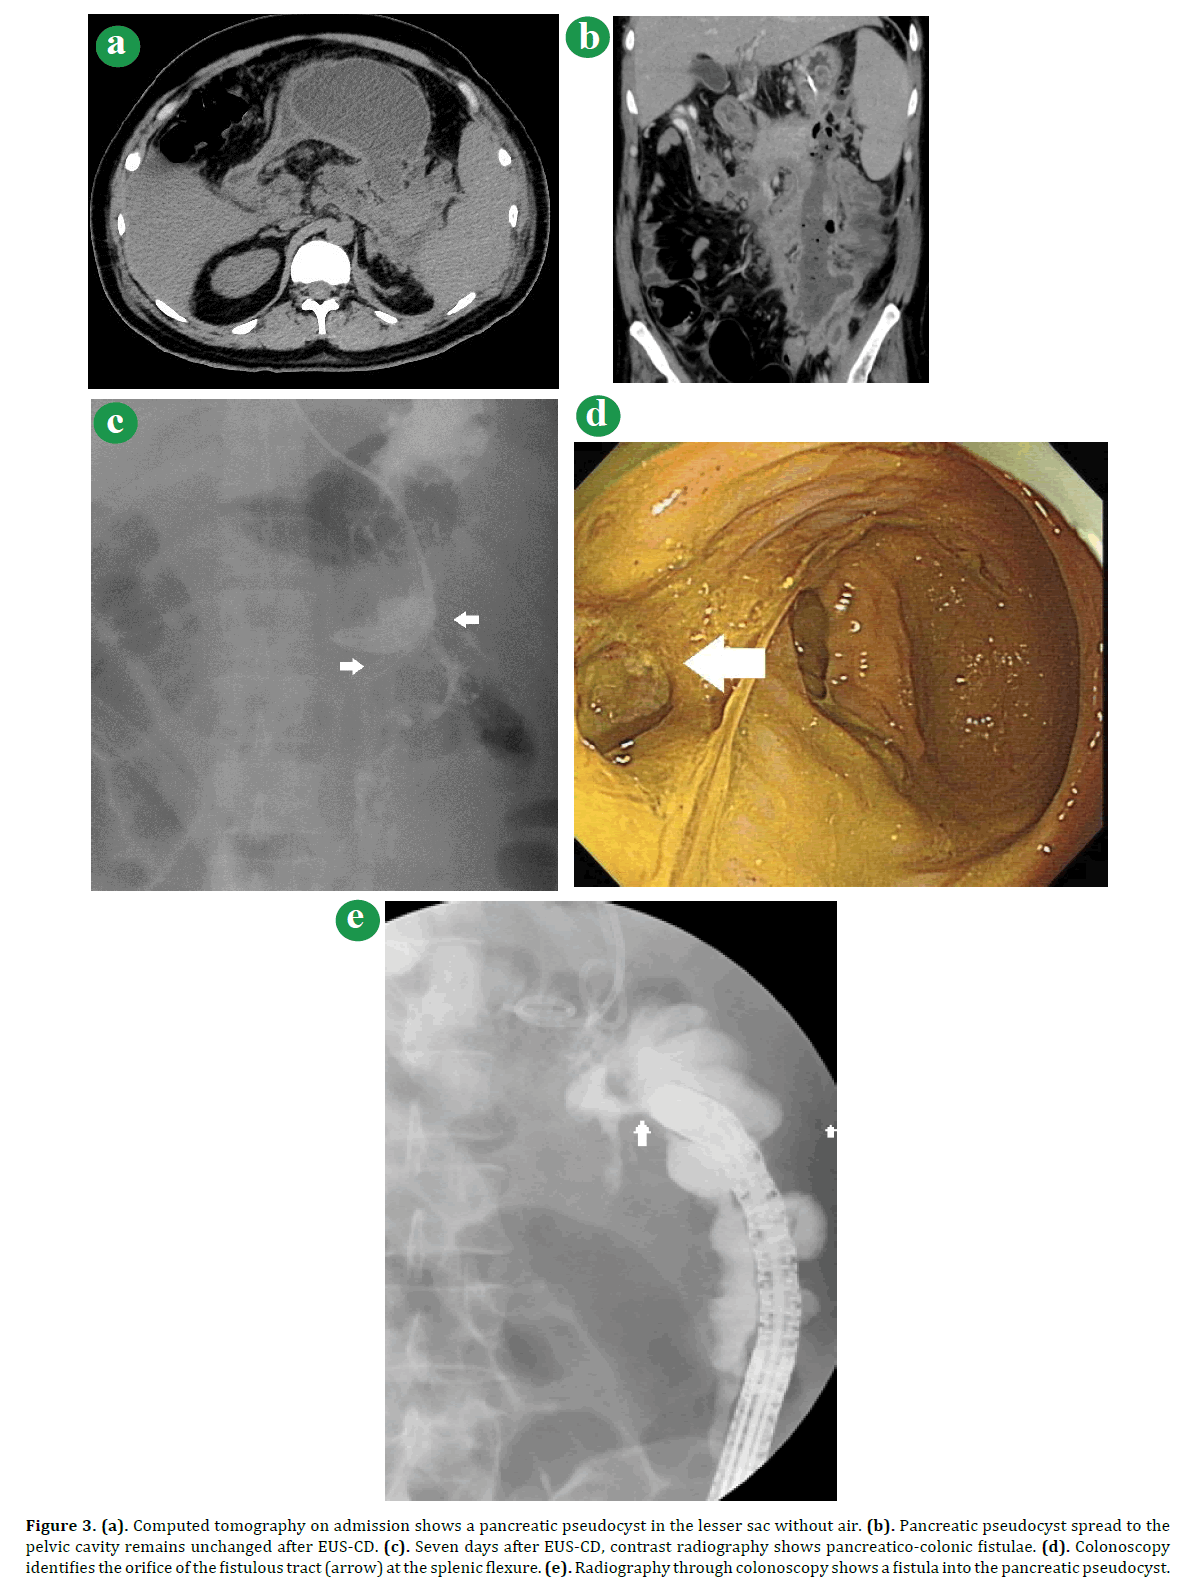 pancreas-computed-tomography-admission